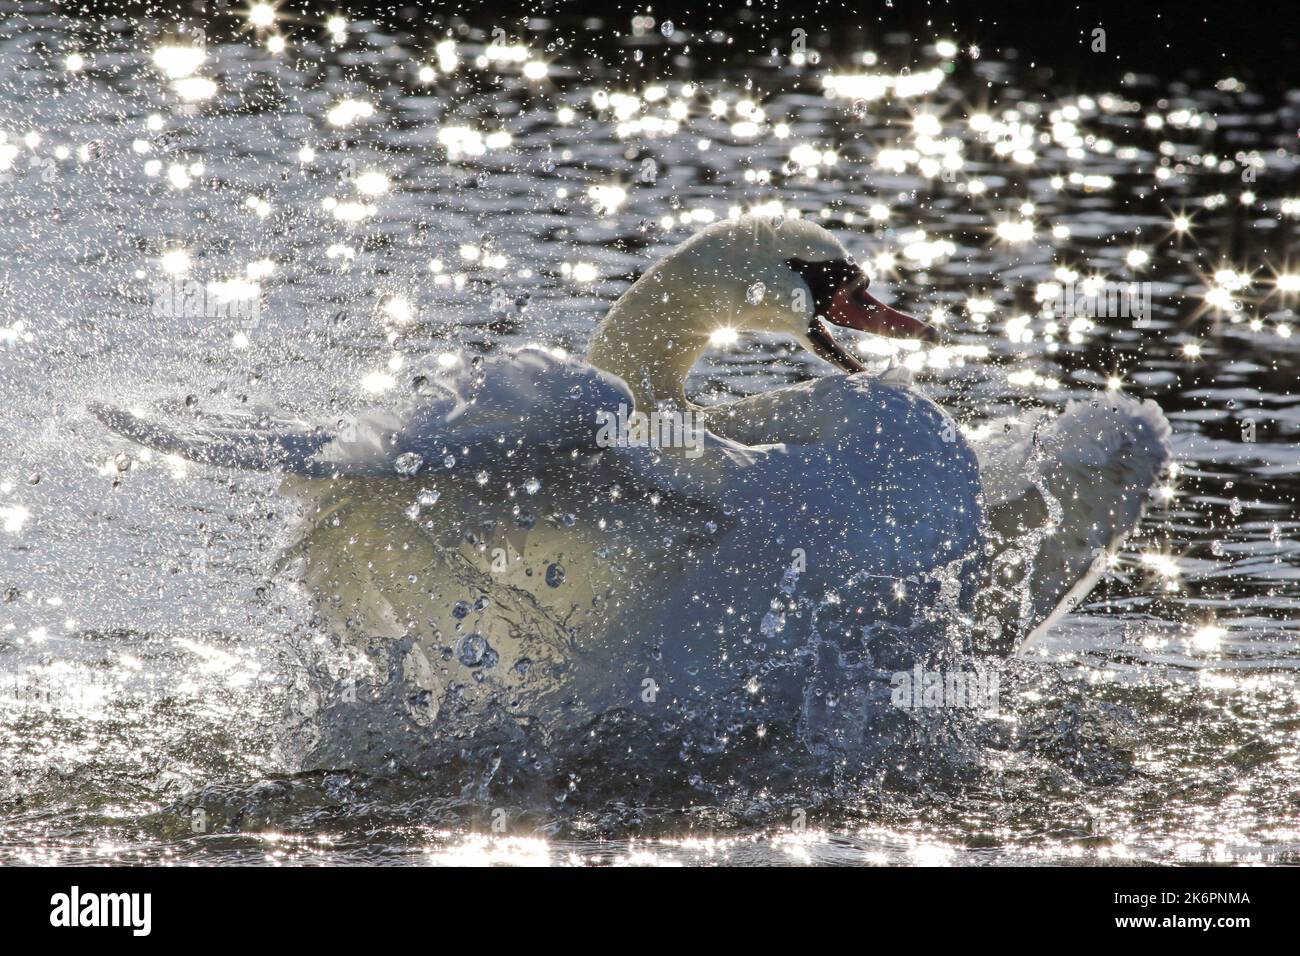 A Mute swan washing itself on the Great Ouse river ar Ely Country Park, Ely, Cambridgesire16th October 2022 Stock Photo